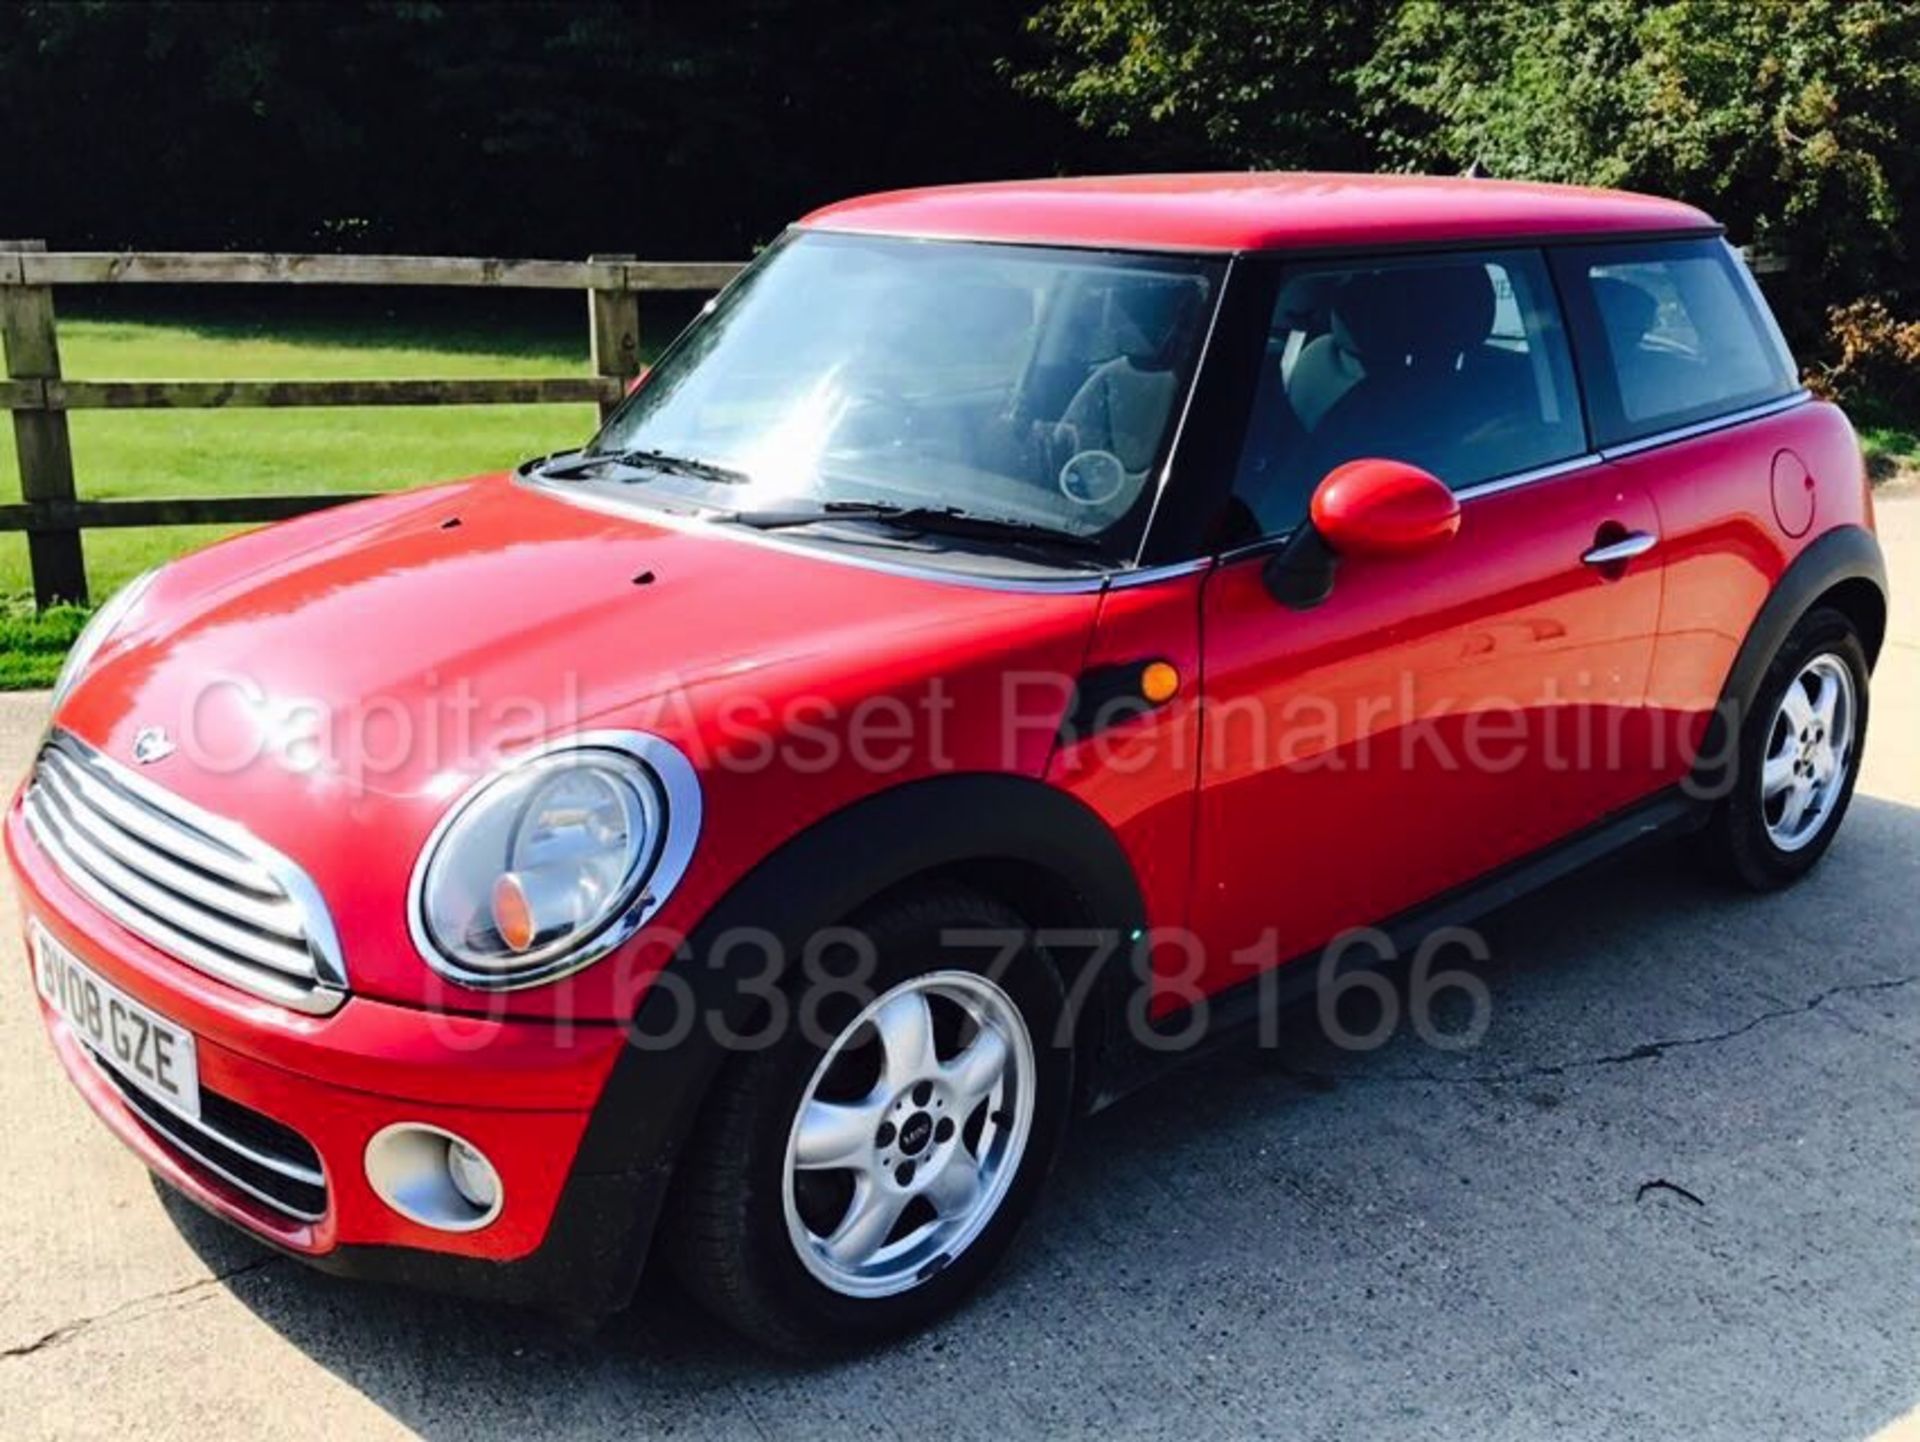 (On Sale) MINI COOPER D (2008) '1.6 DIESEL - 6 SPEED - STOP / START' **AIR CON** (NO VAT - SAVE 20%) - Image 3 of 19